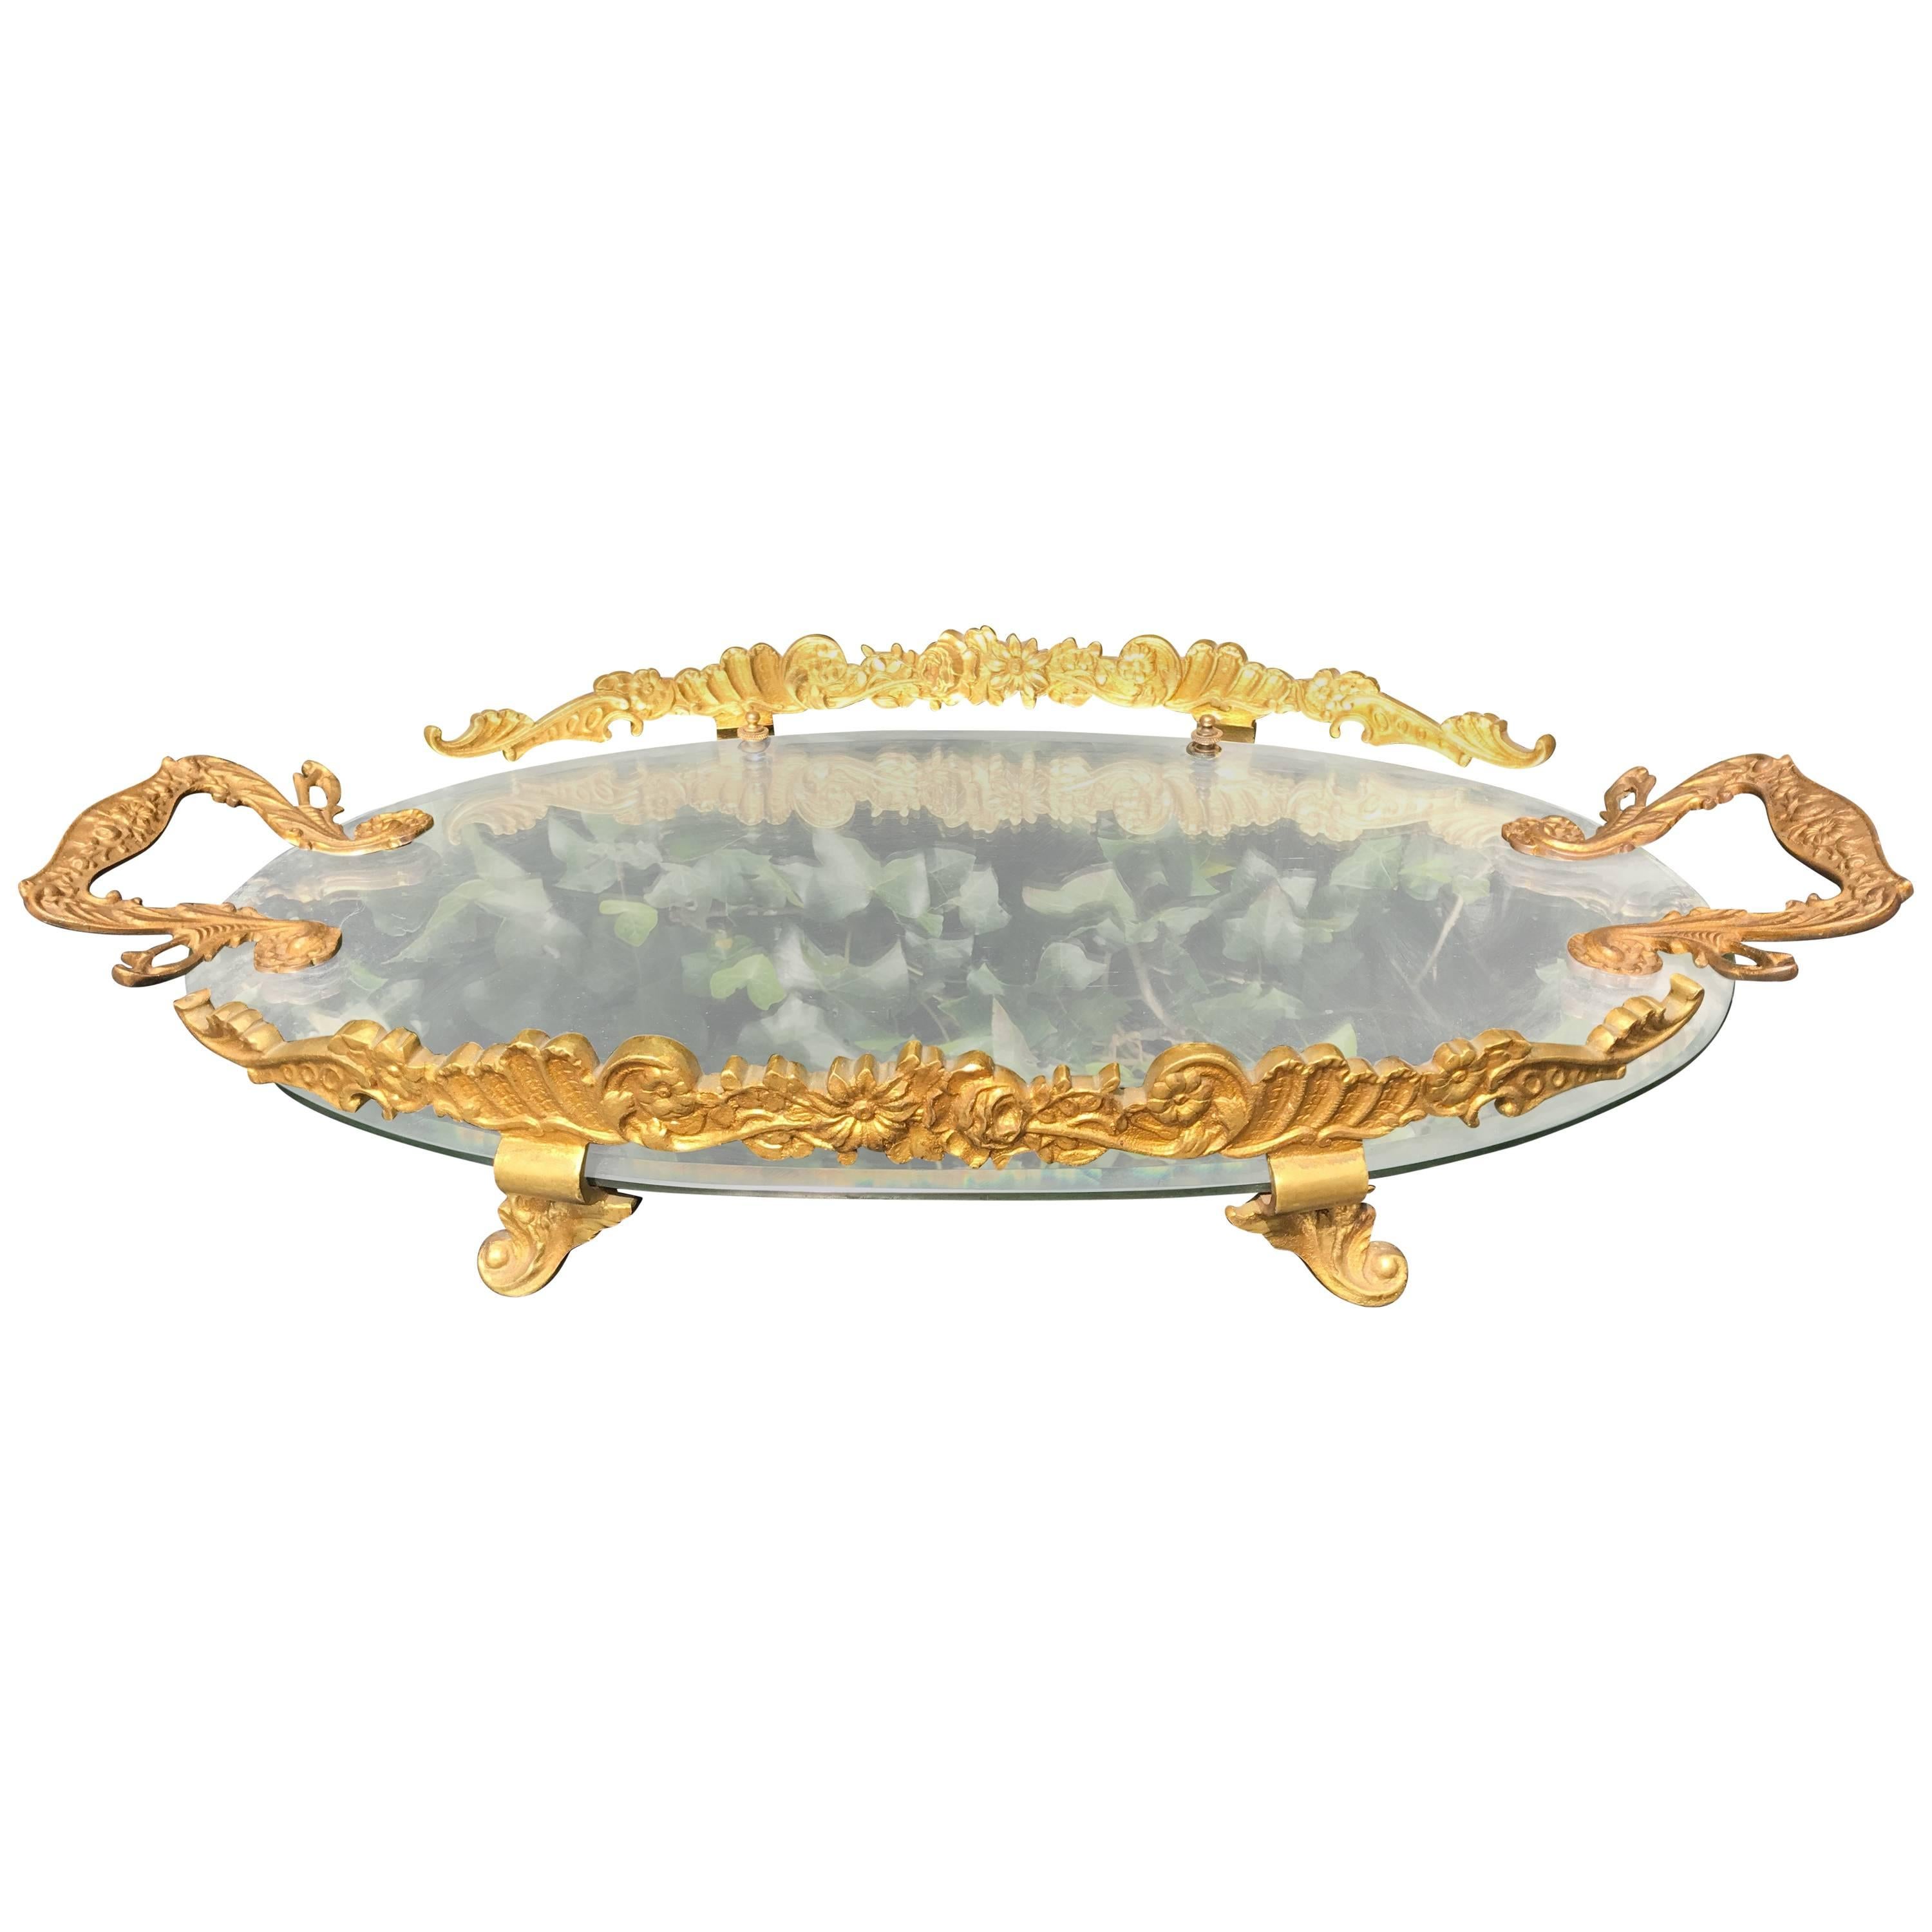 Hand-Crafted, Gilt Bronze and Oval Mirror Serving or Display Tray Flowery Design